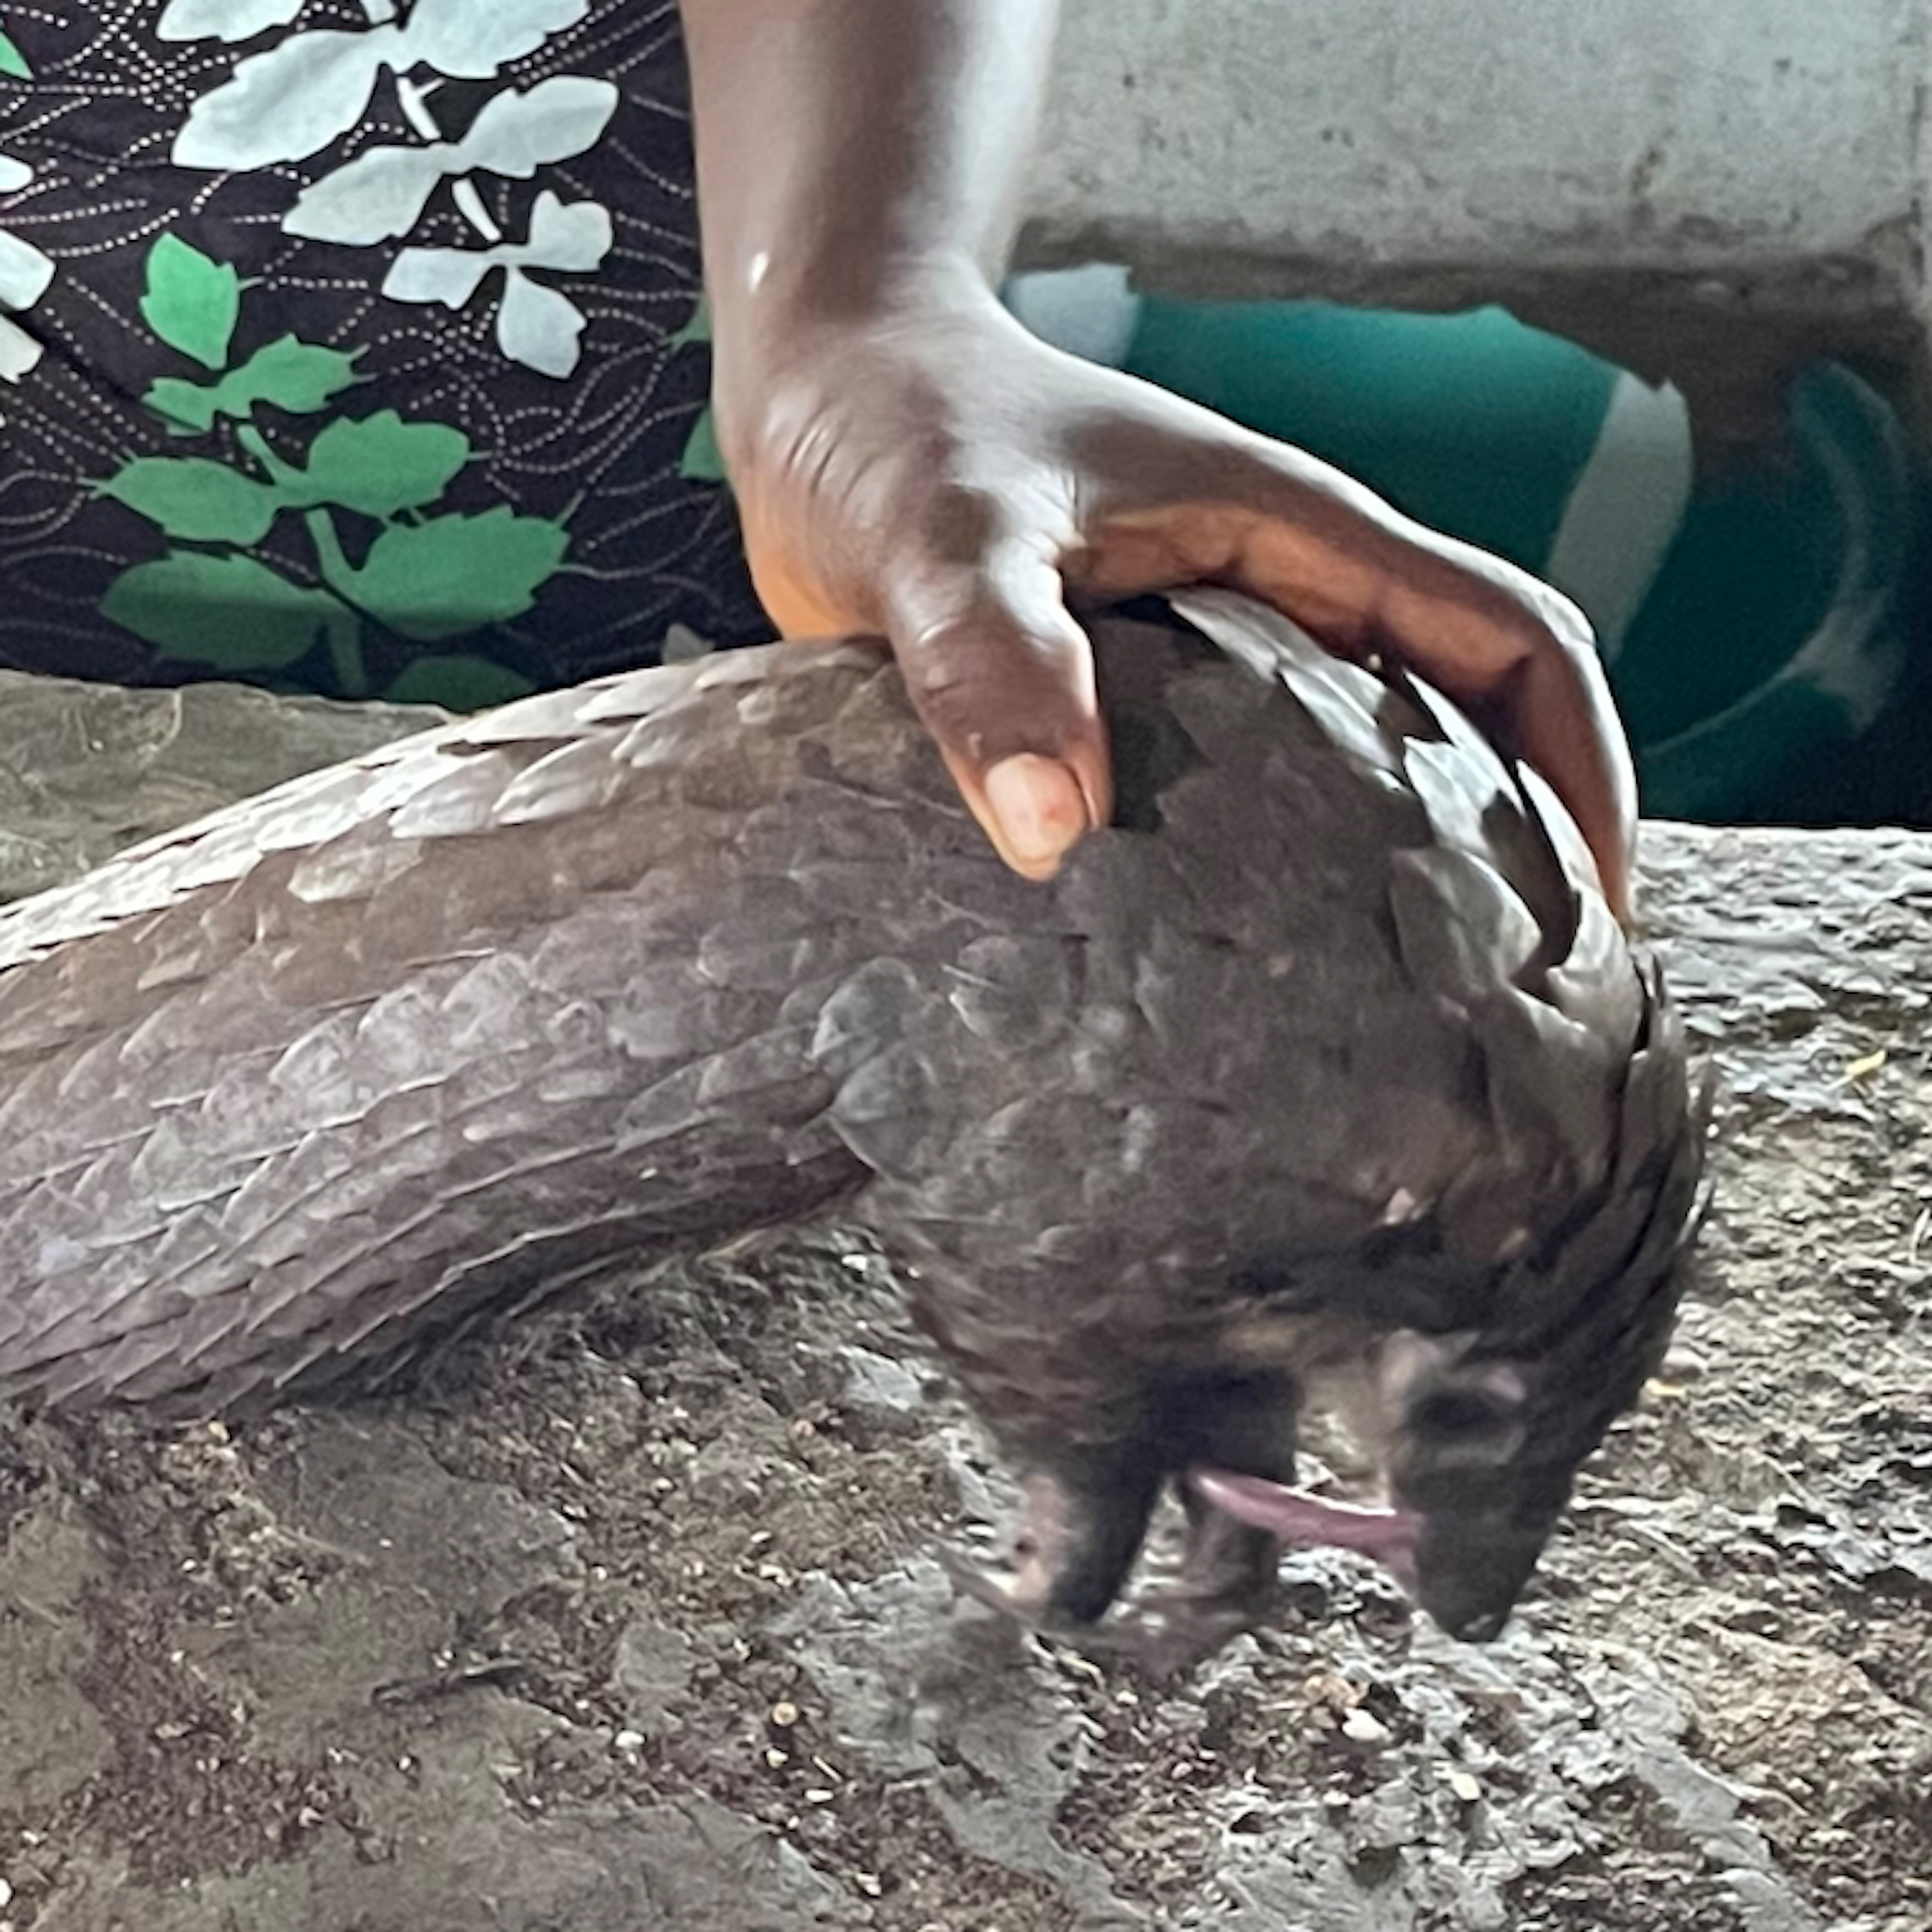 A scaly, long-tailed animal being  held in a person's hand on a flat cement surface